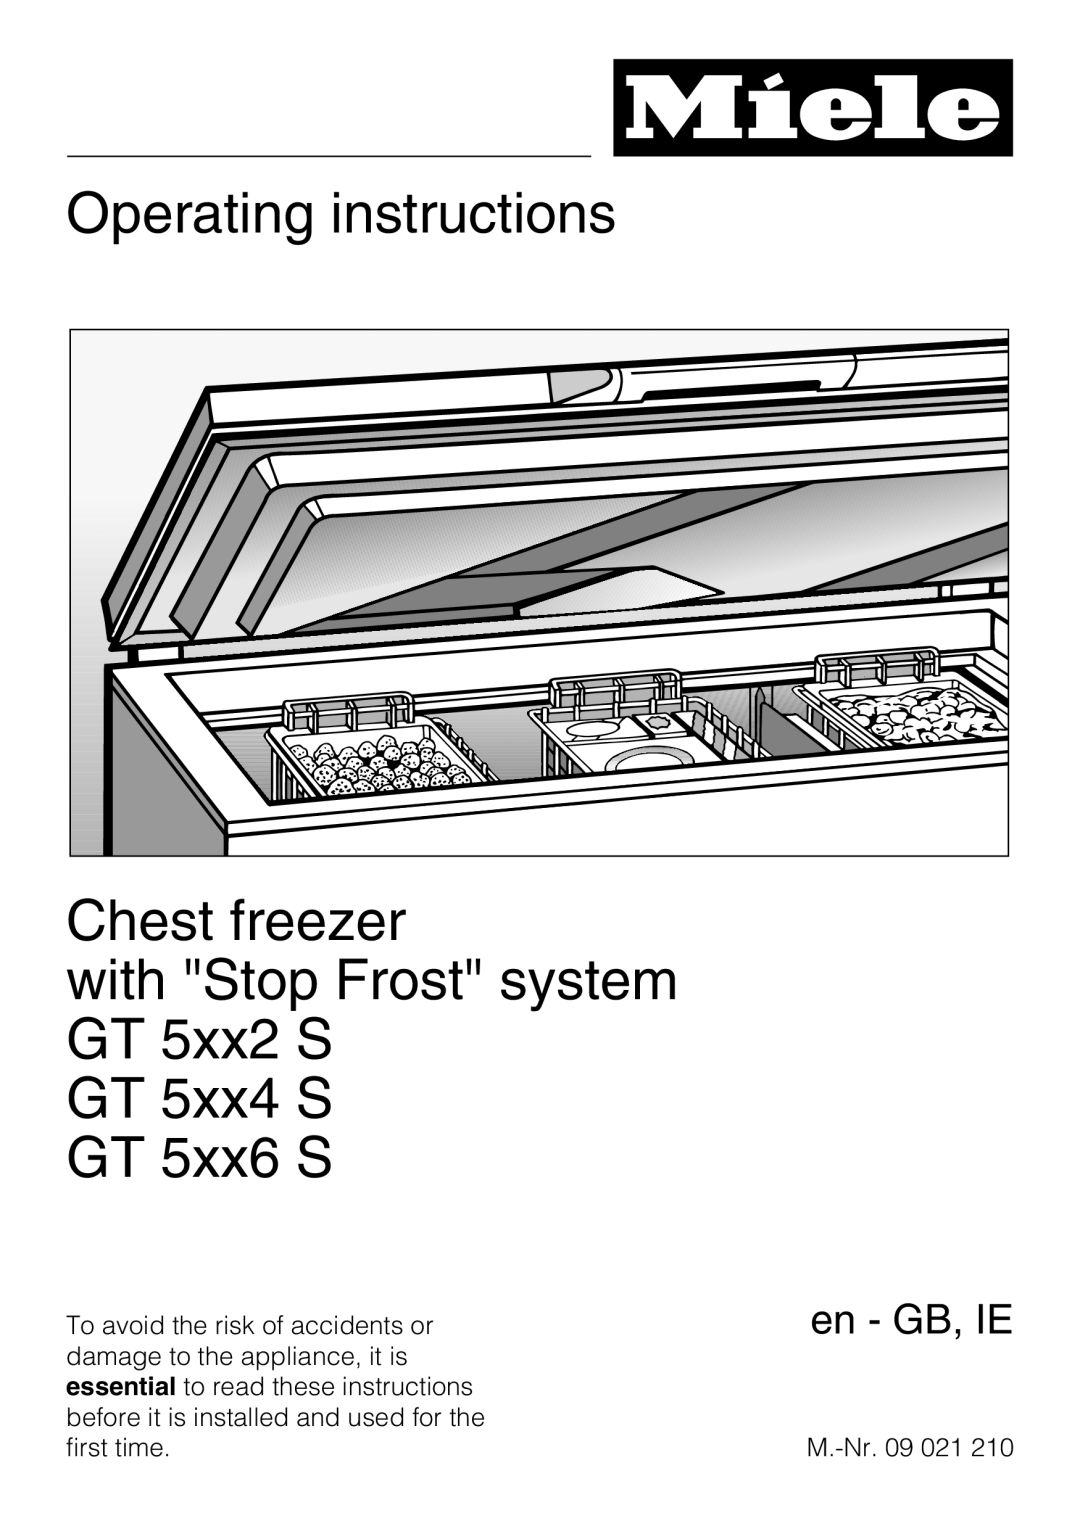 Miele GT 5xx6 S manual Operating instructions Chest freezer, with Stop Frost system GT 5xx2 S GT 5xx4 S, en - GB, IE 